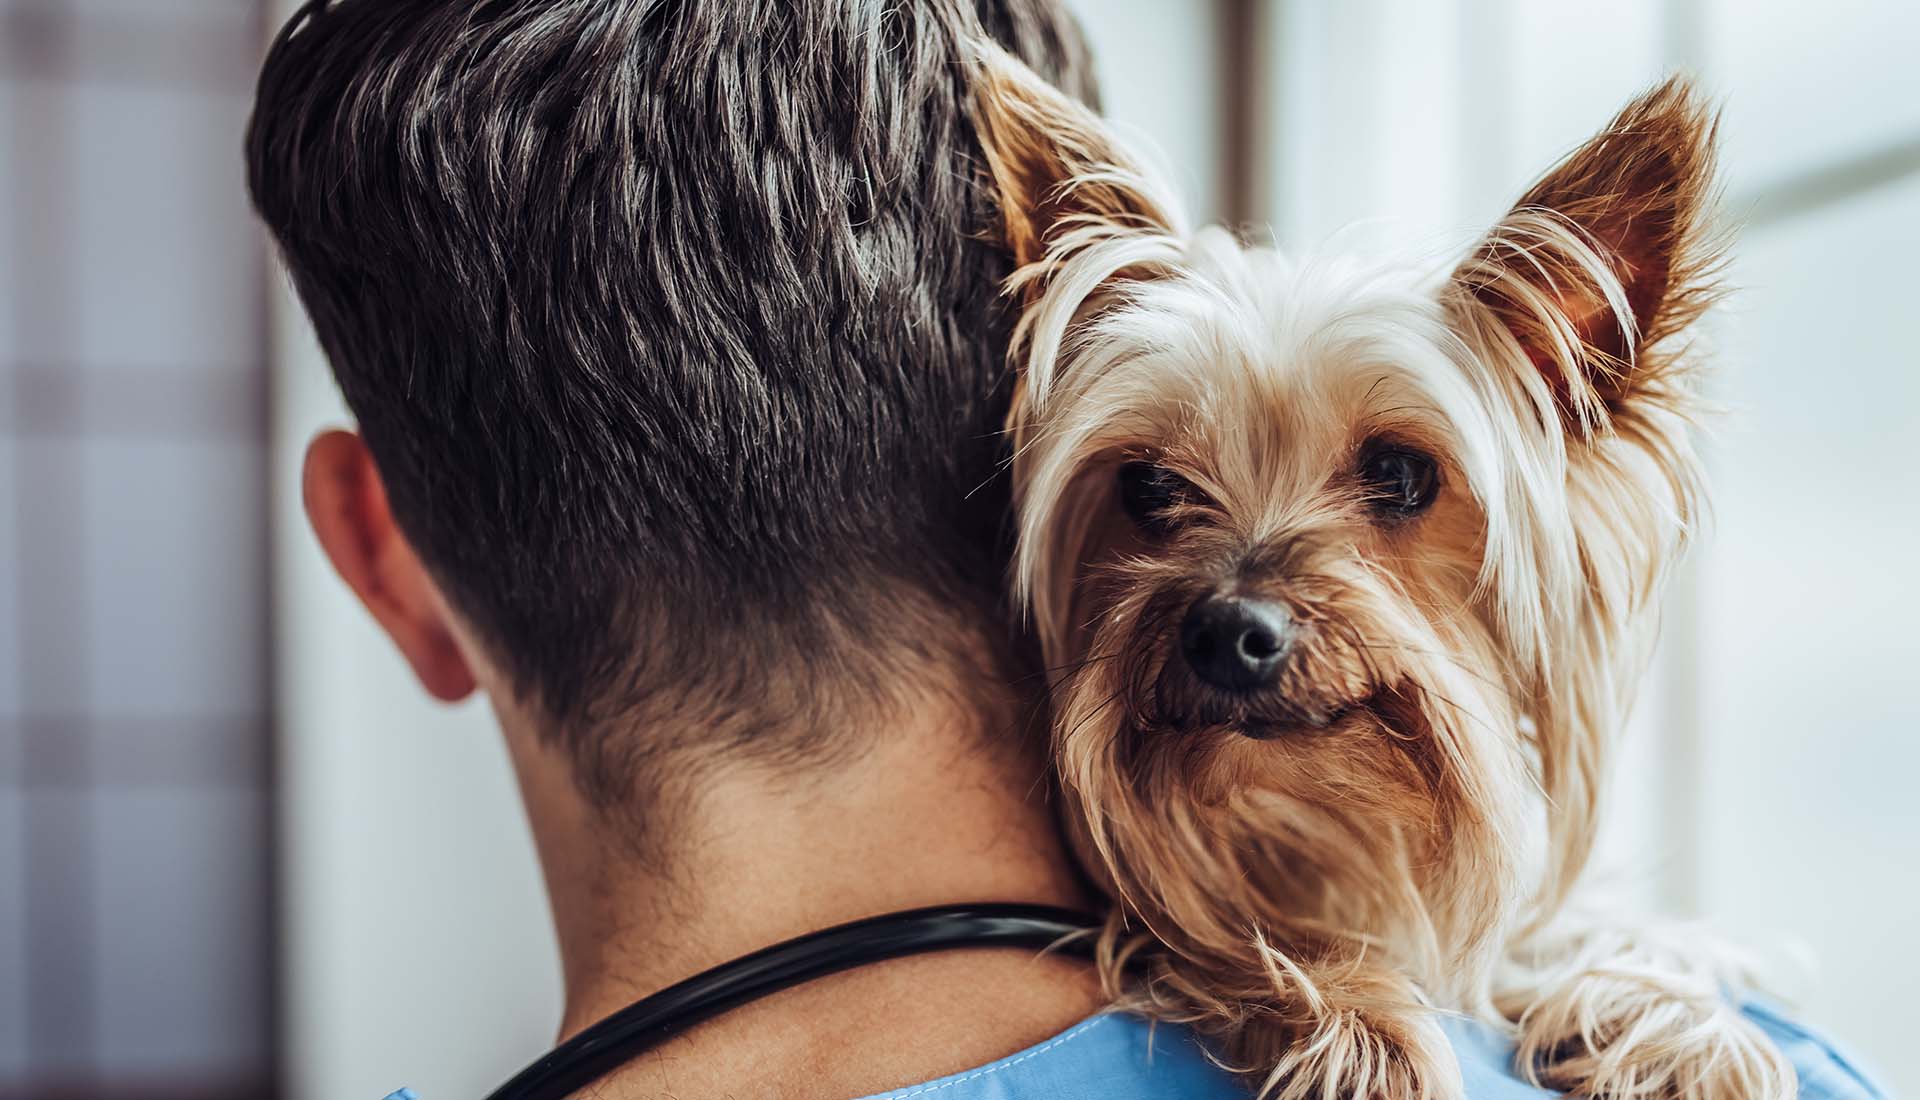 A veterinarian holds a Yorkie dog on his shoulder.